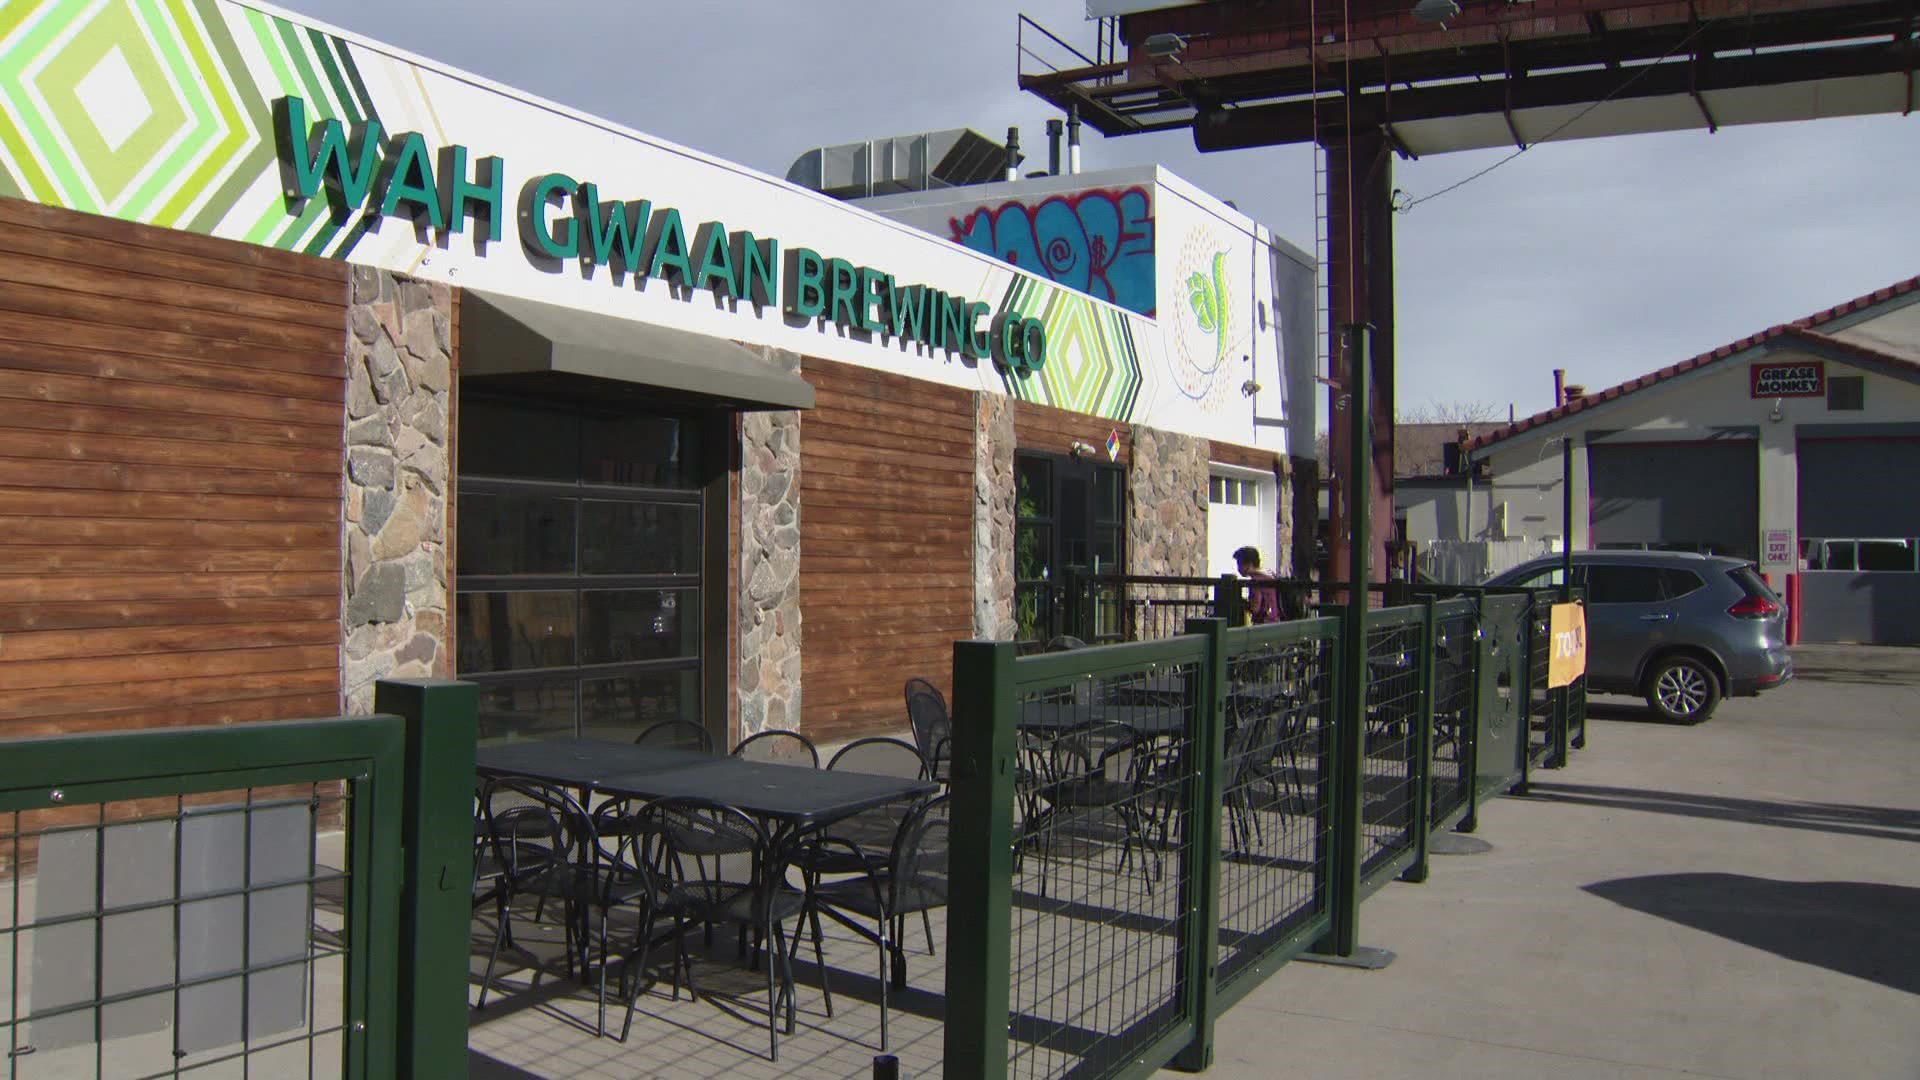 9NEWS Reporter Steve Staeger talked to the owners of Wah Gwaan this afternoon ... and Steve... they've been able to accomplish a lot in those 18 months.